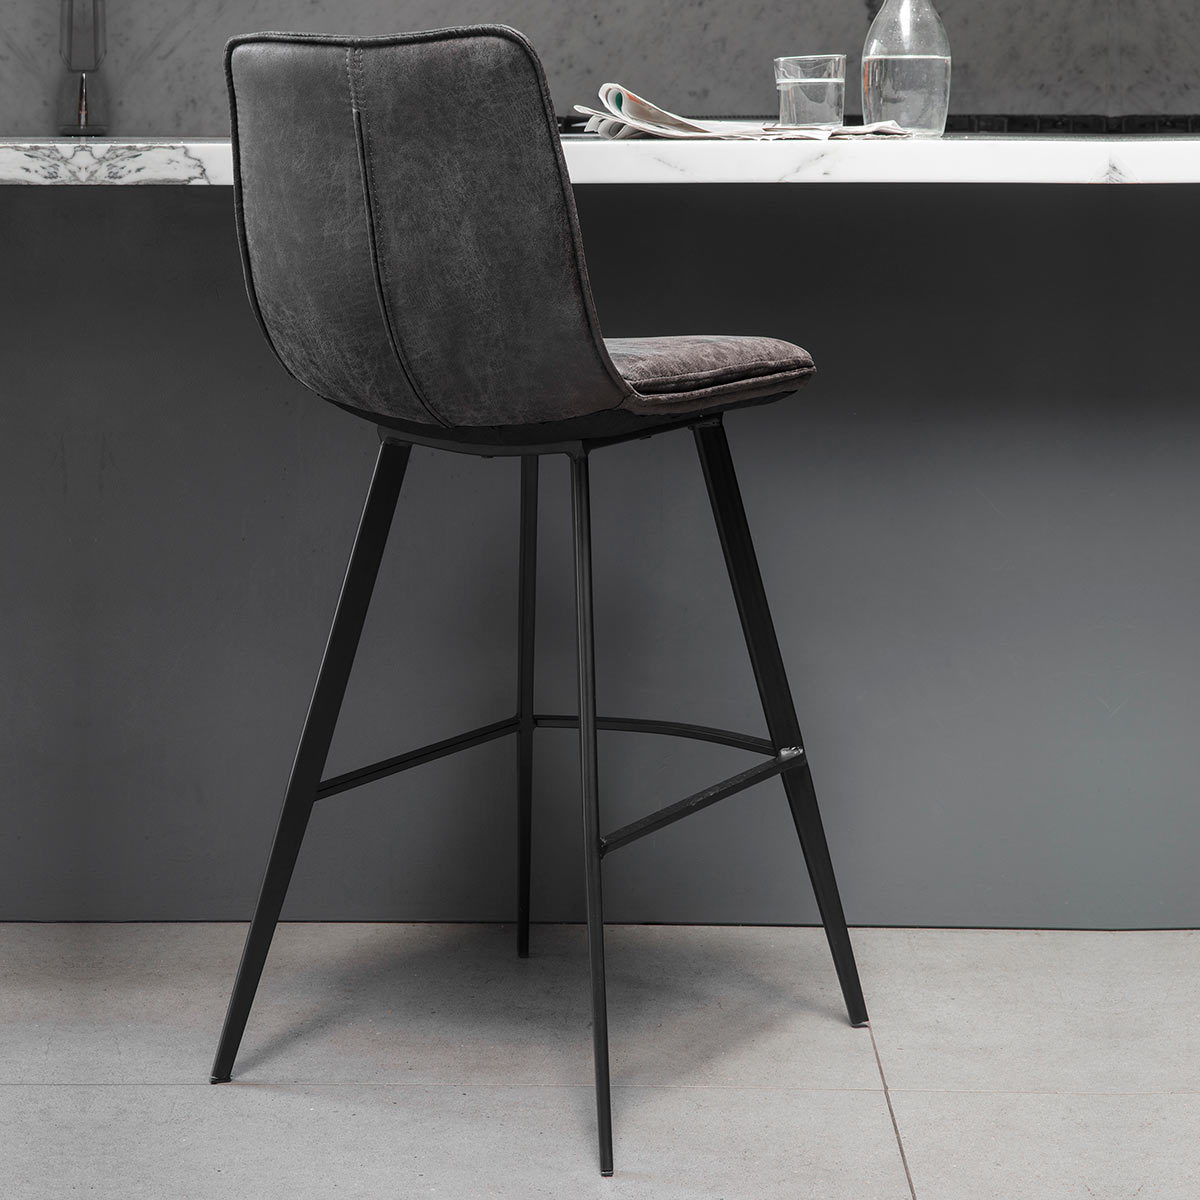 Gallery Palmer Grey Faux Leather Bar, Faux Leather Stool